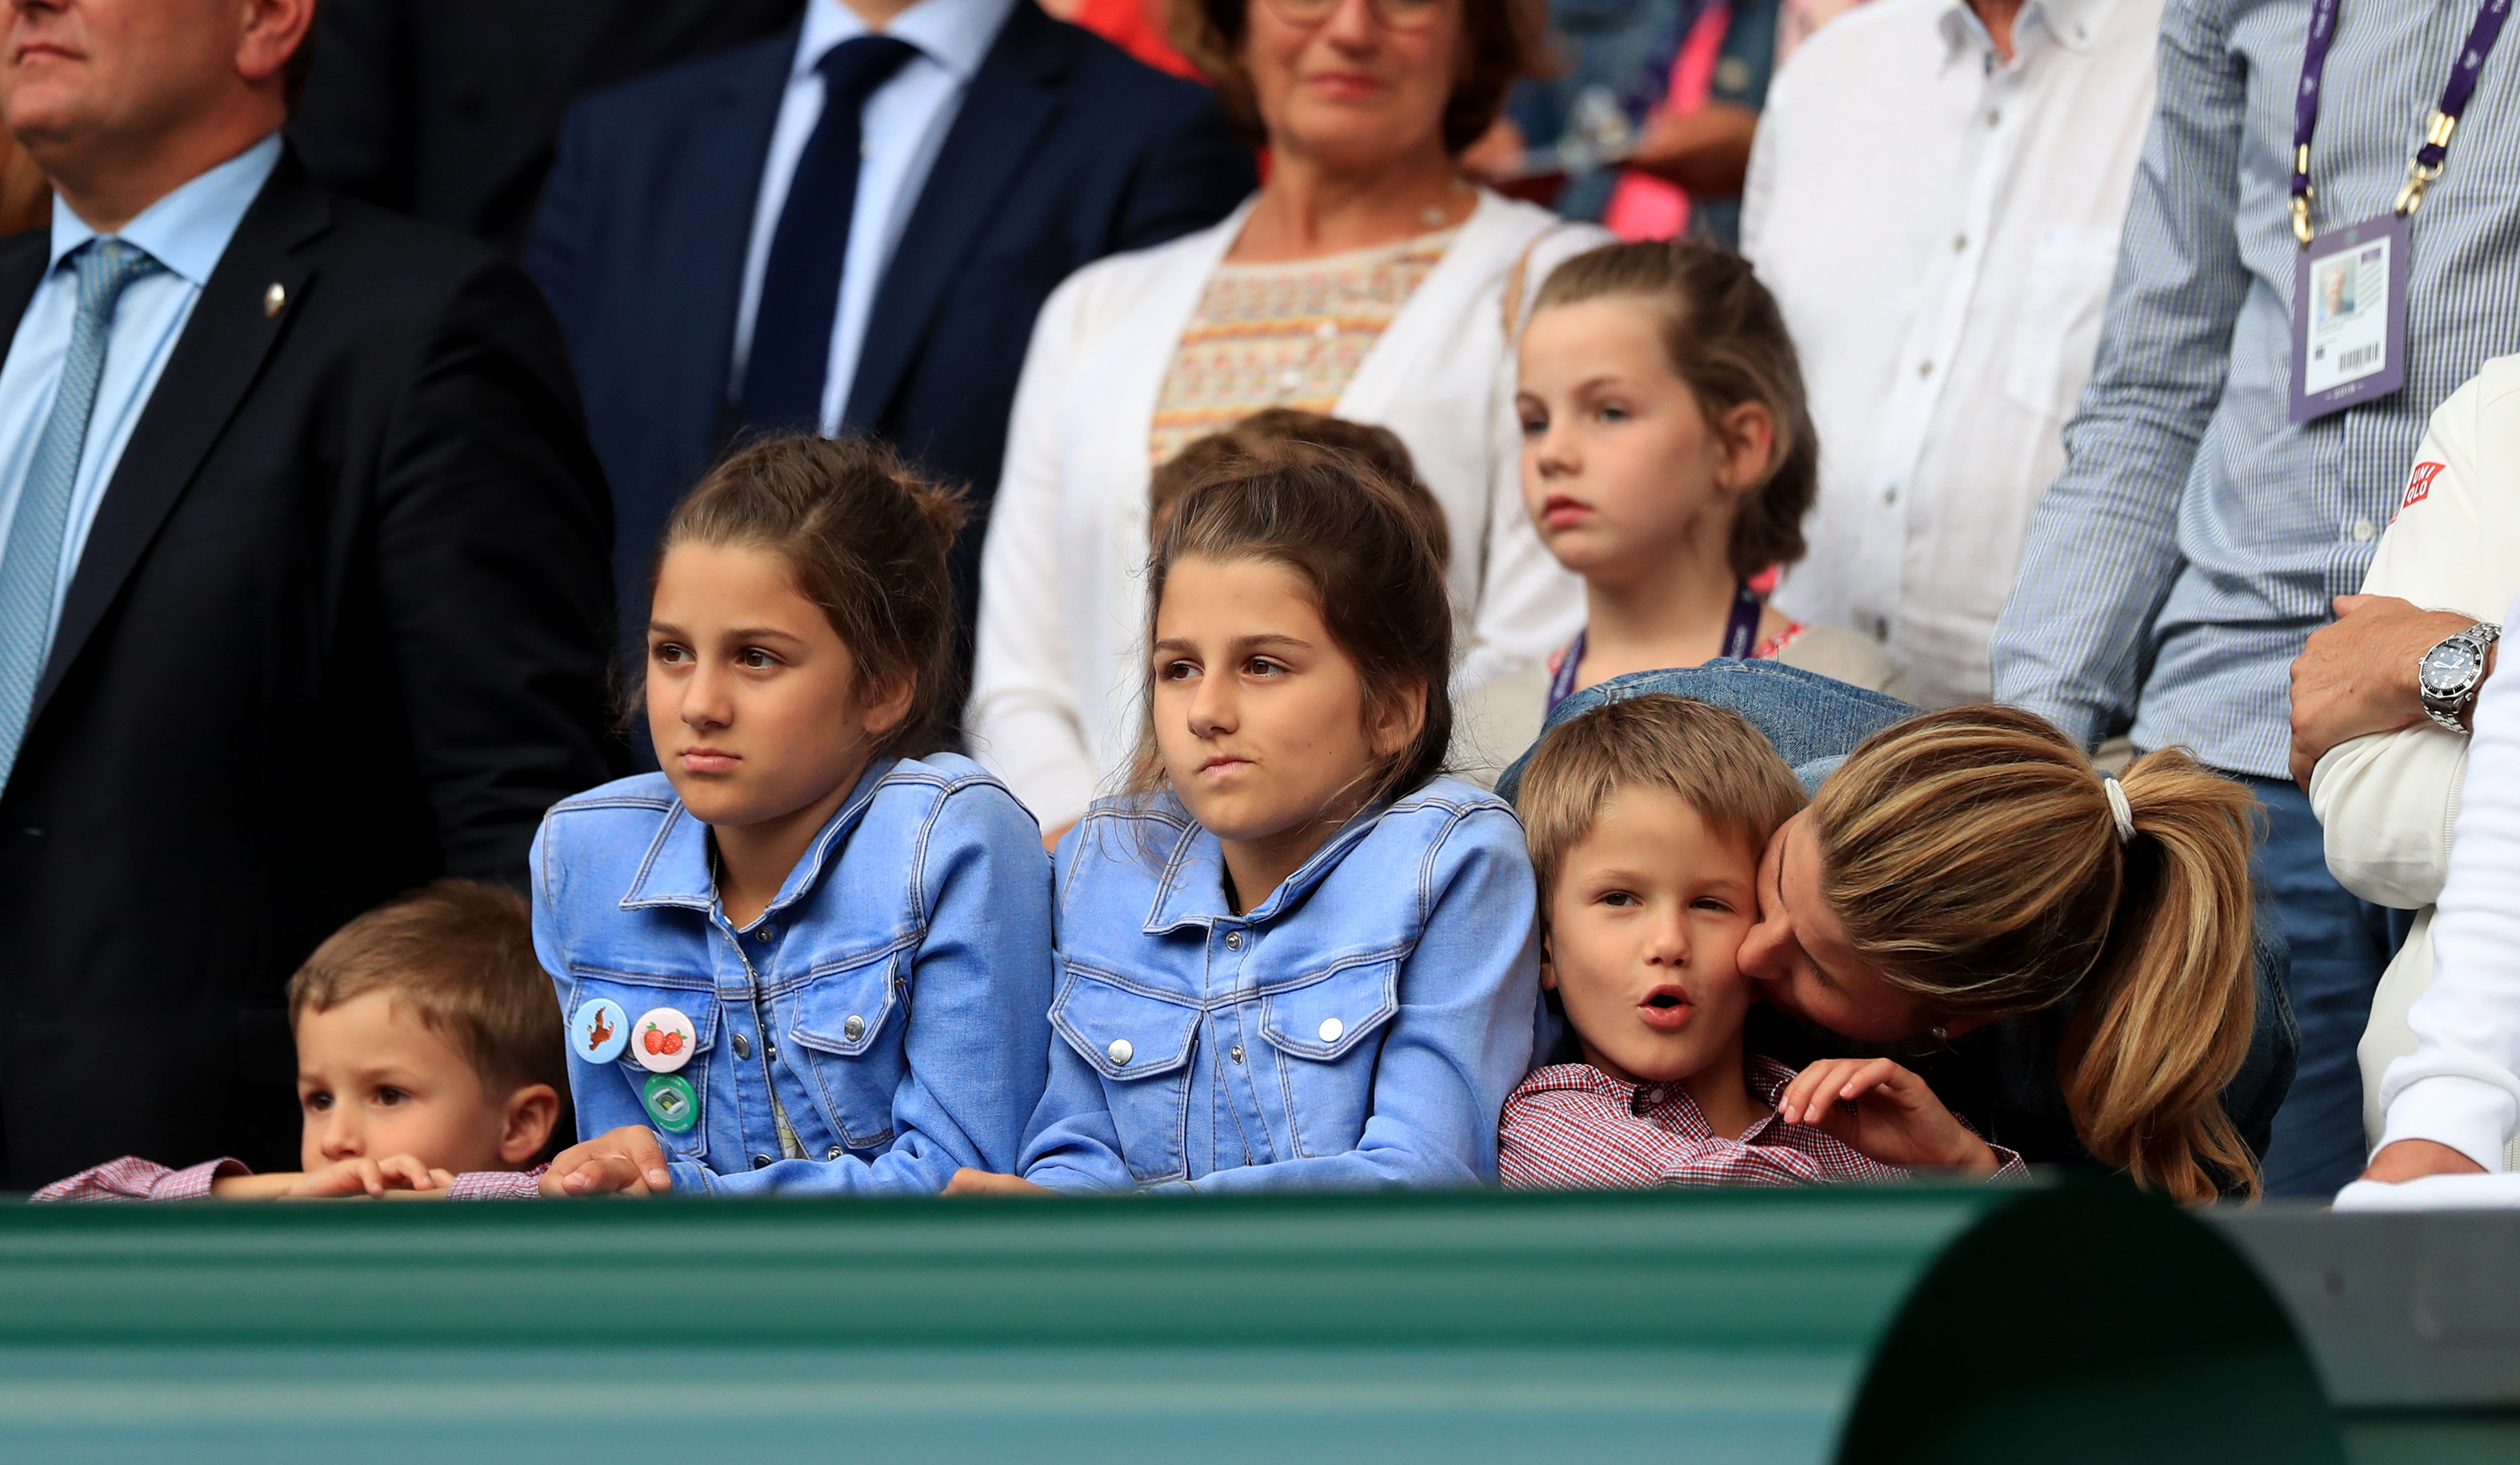 Mirka Federer with her four children, Myla Rose, Charlene Riva, Leo, and Lennert, at Wimbledon on July 14, 2019, in London, England. | Source: Getty Images